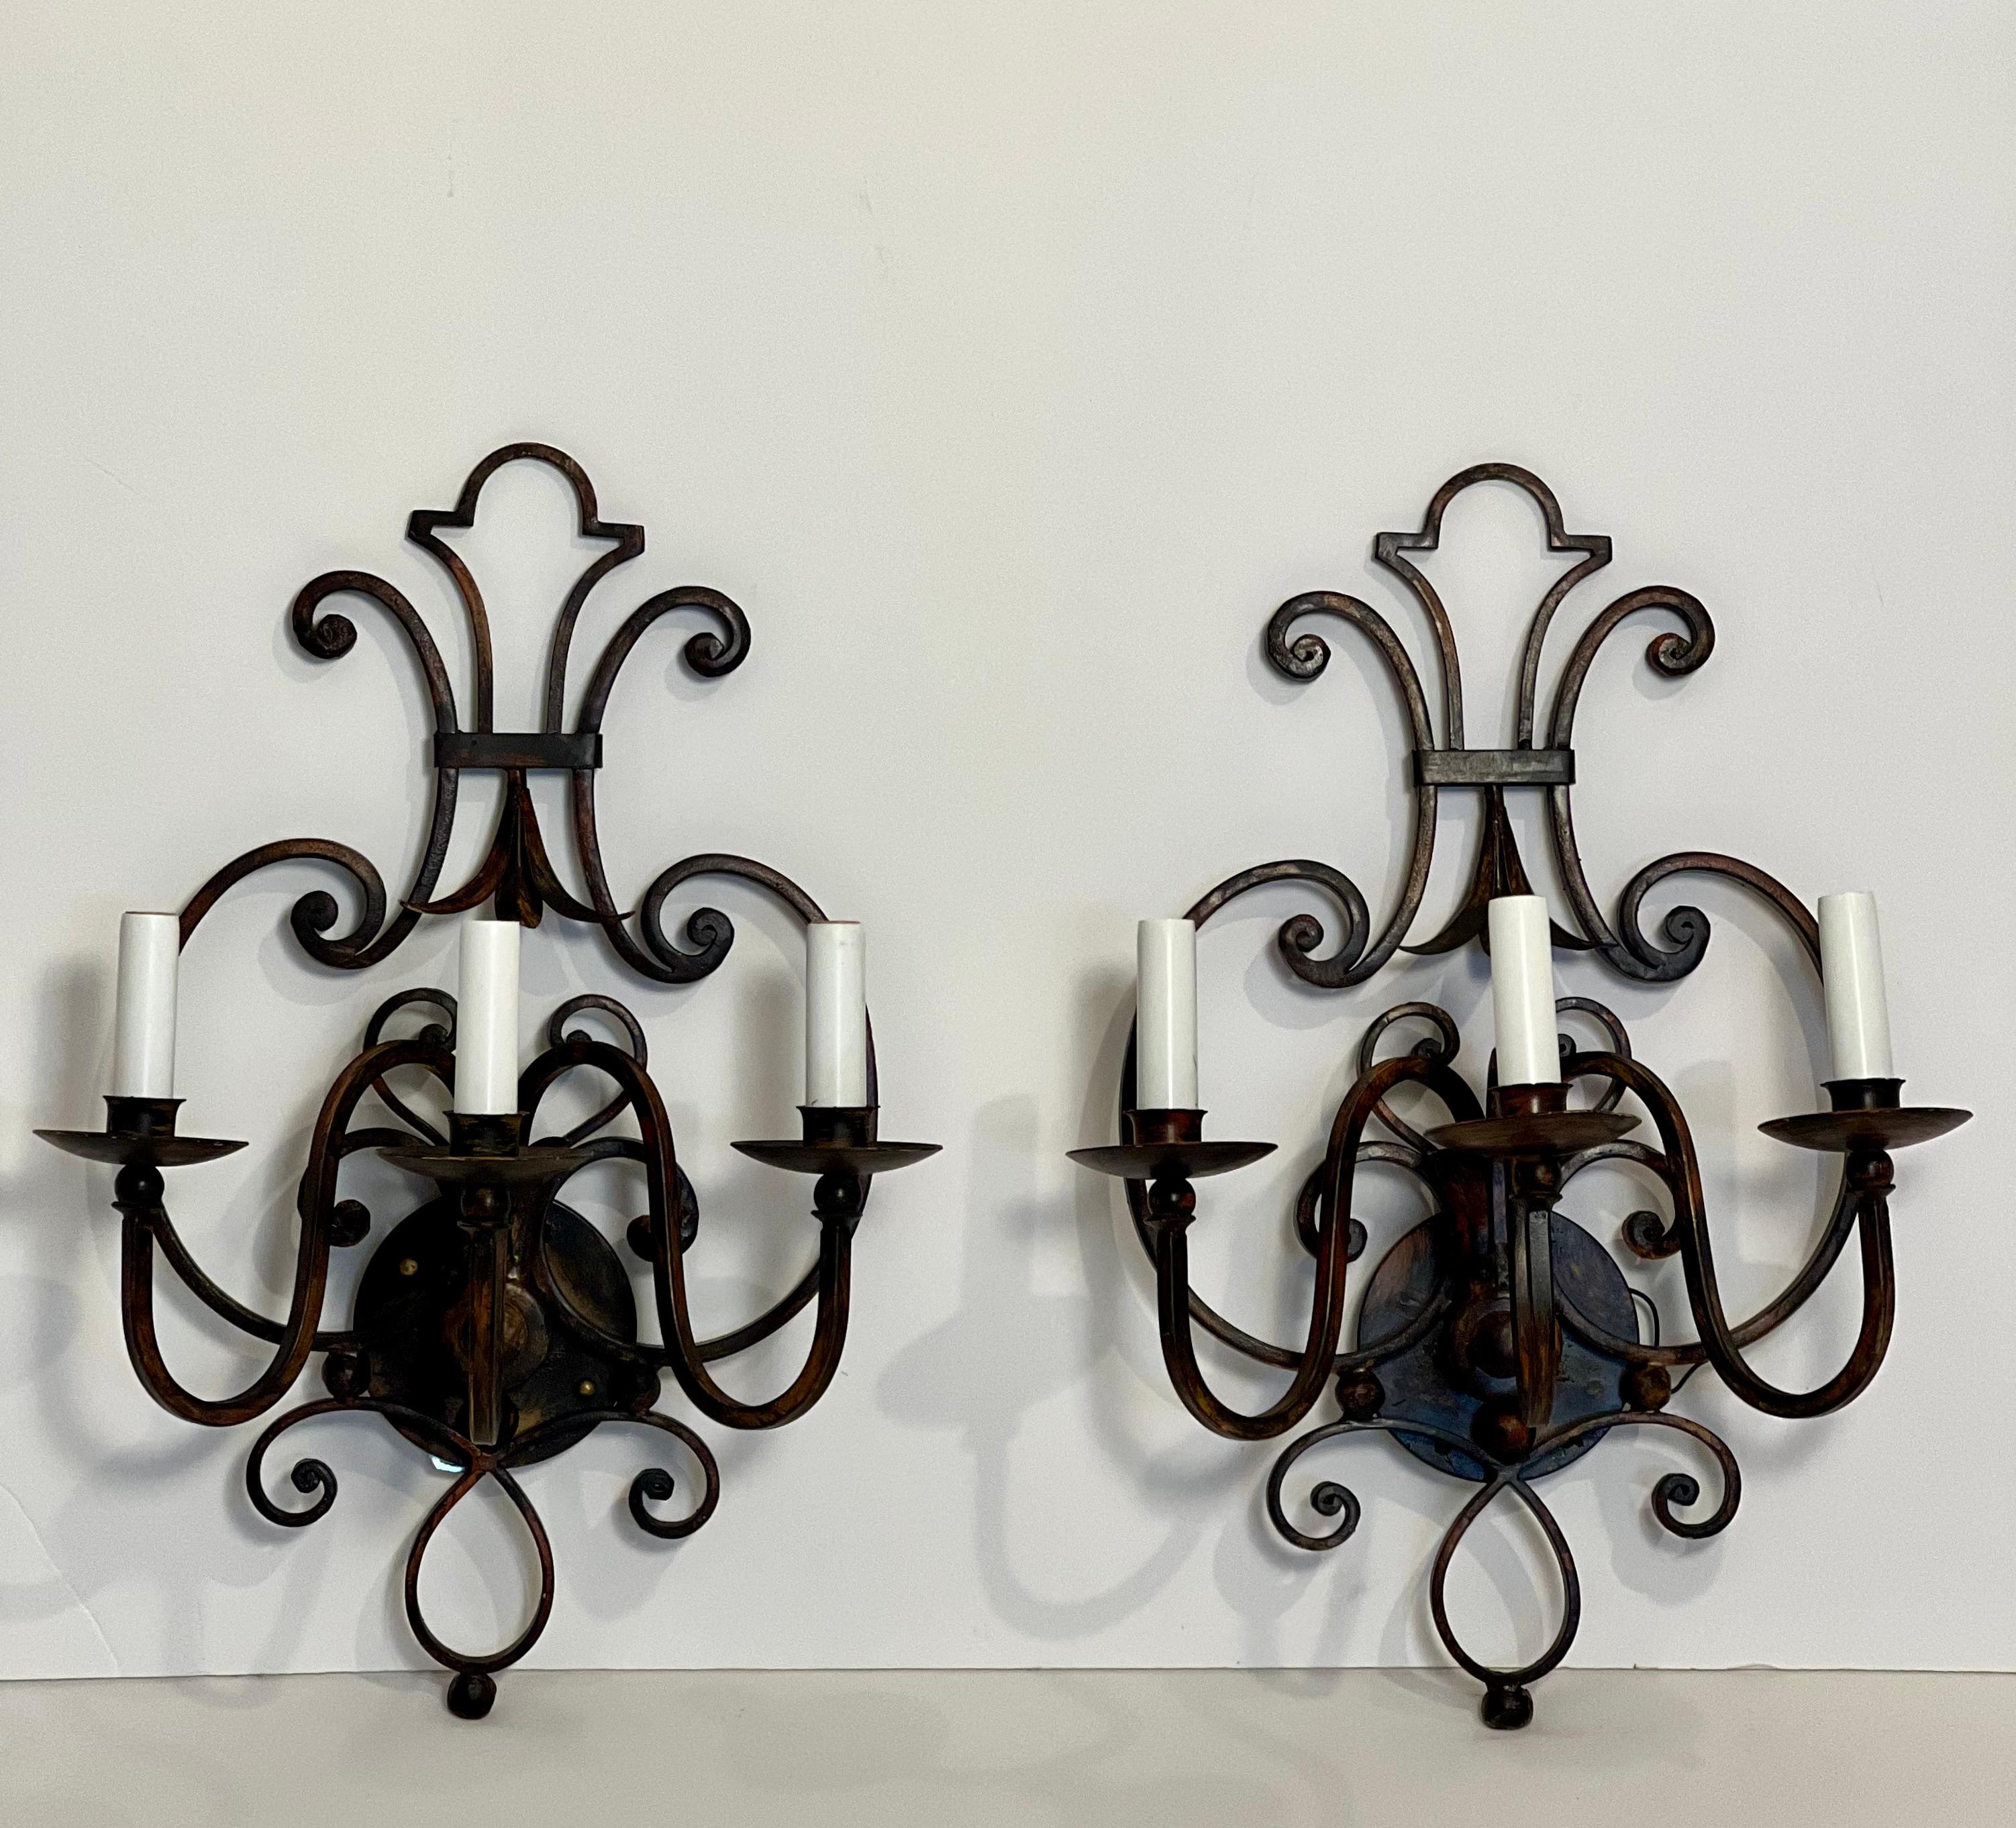 Pair of gorgeous Italian hand wrought iron sconces with a blackened rust finish.

Crafted in early 2000s but have never been used as they were floor samples in an upscale lighting boutique. Shades are included should you prefer to use them. They